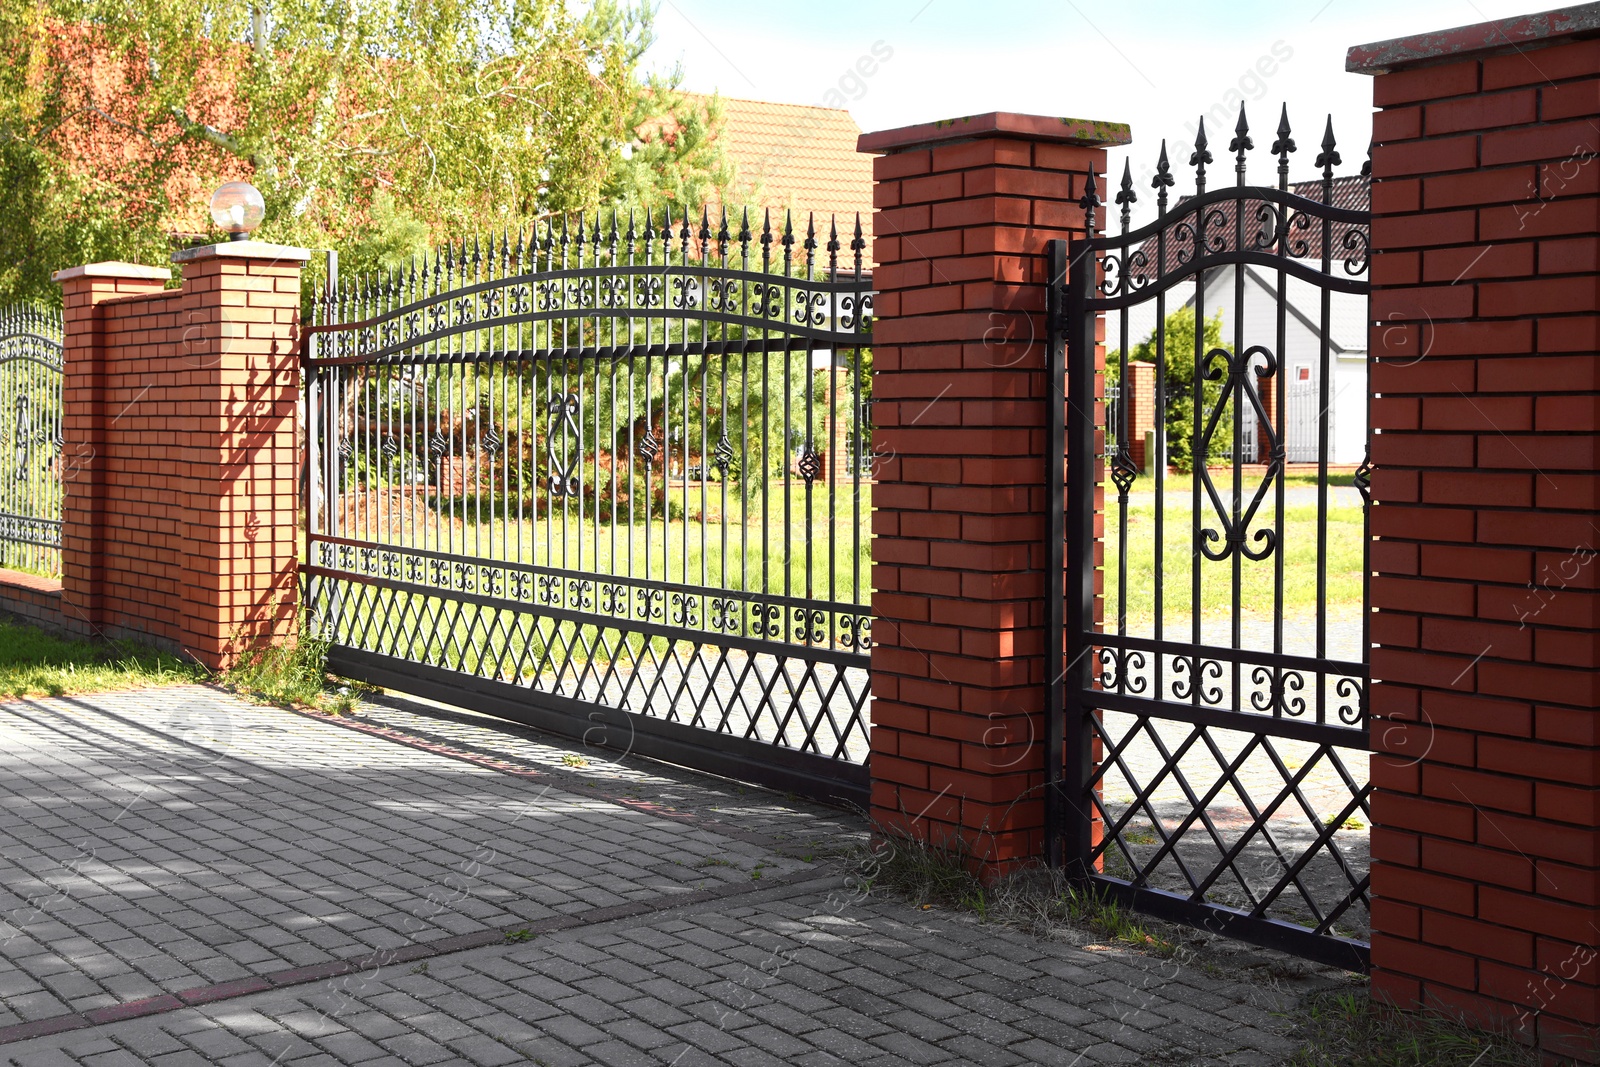 Photo of Closed metal gates near houses and trees